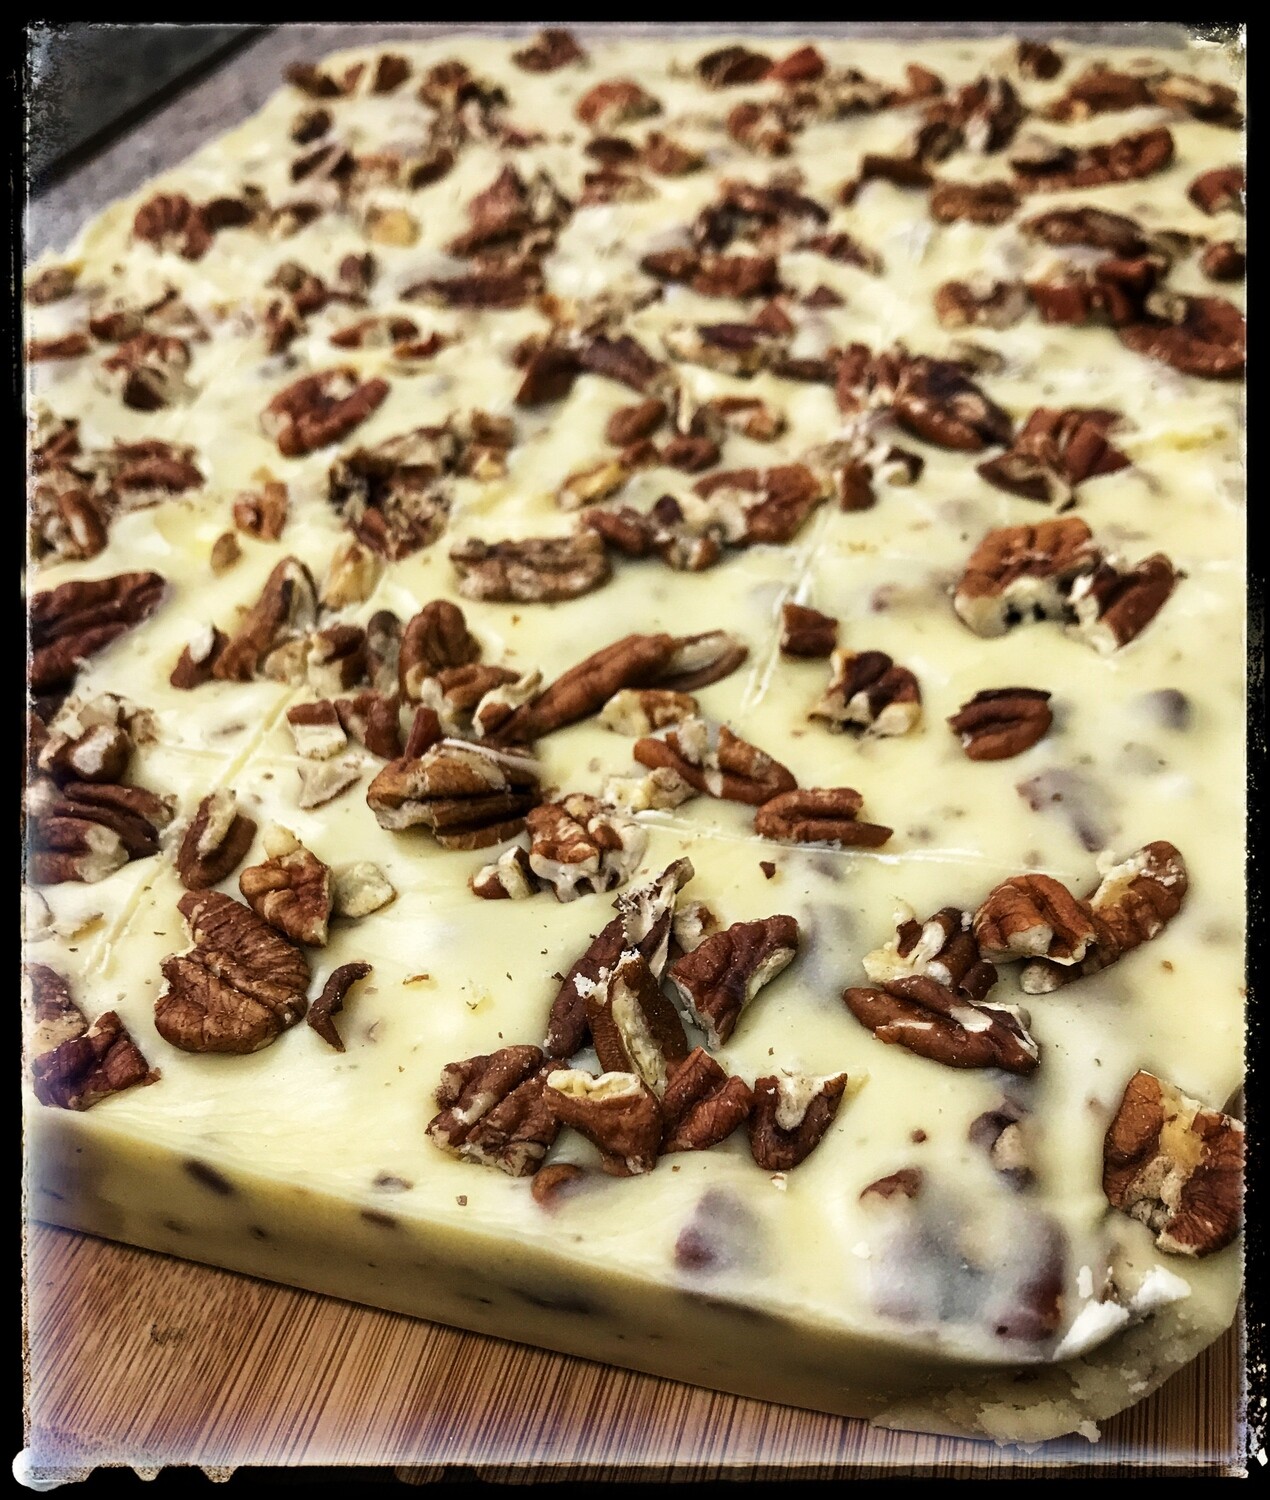 FUDGE OF THE MONTH - BUTTER PECAN